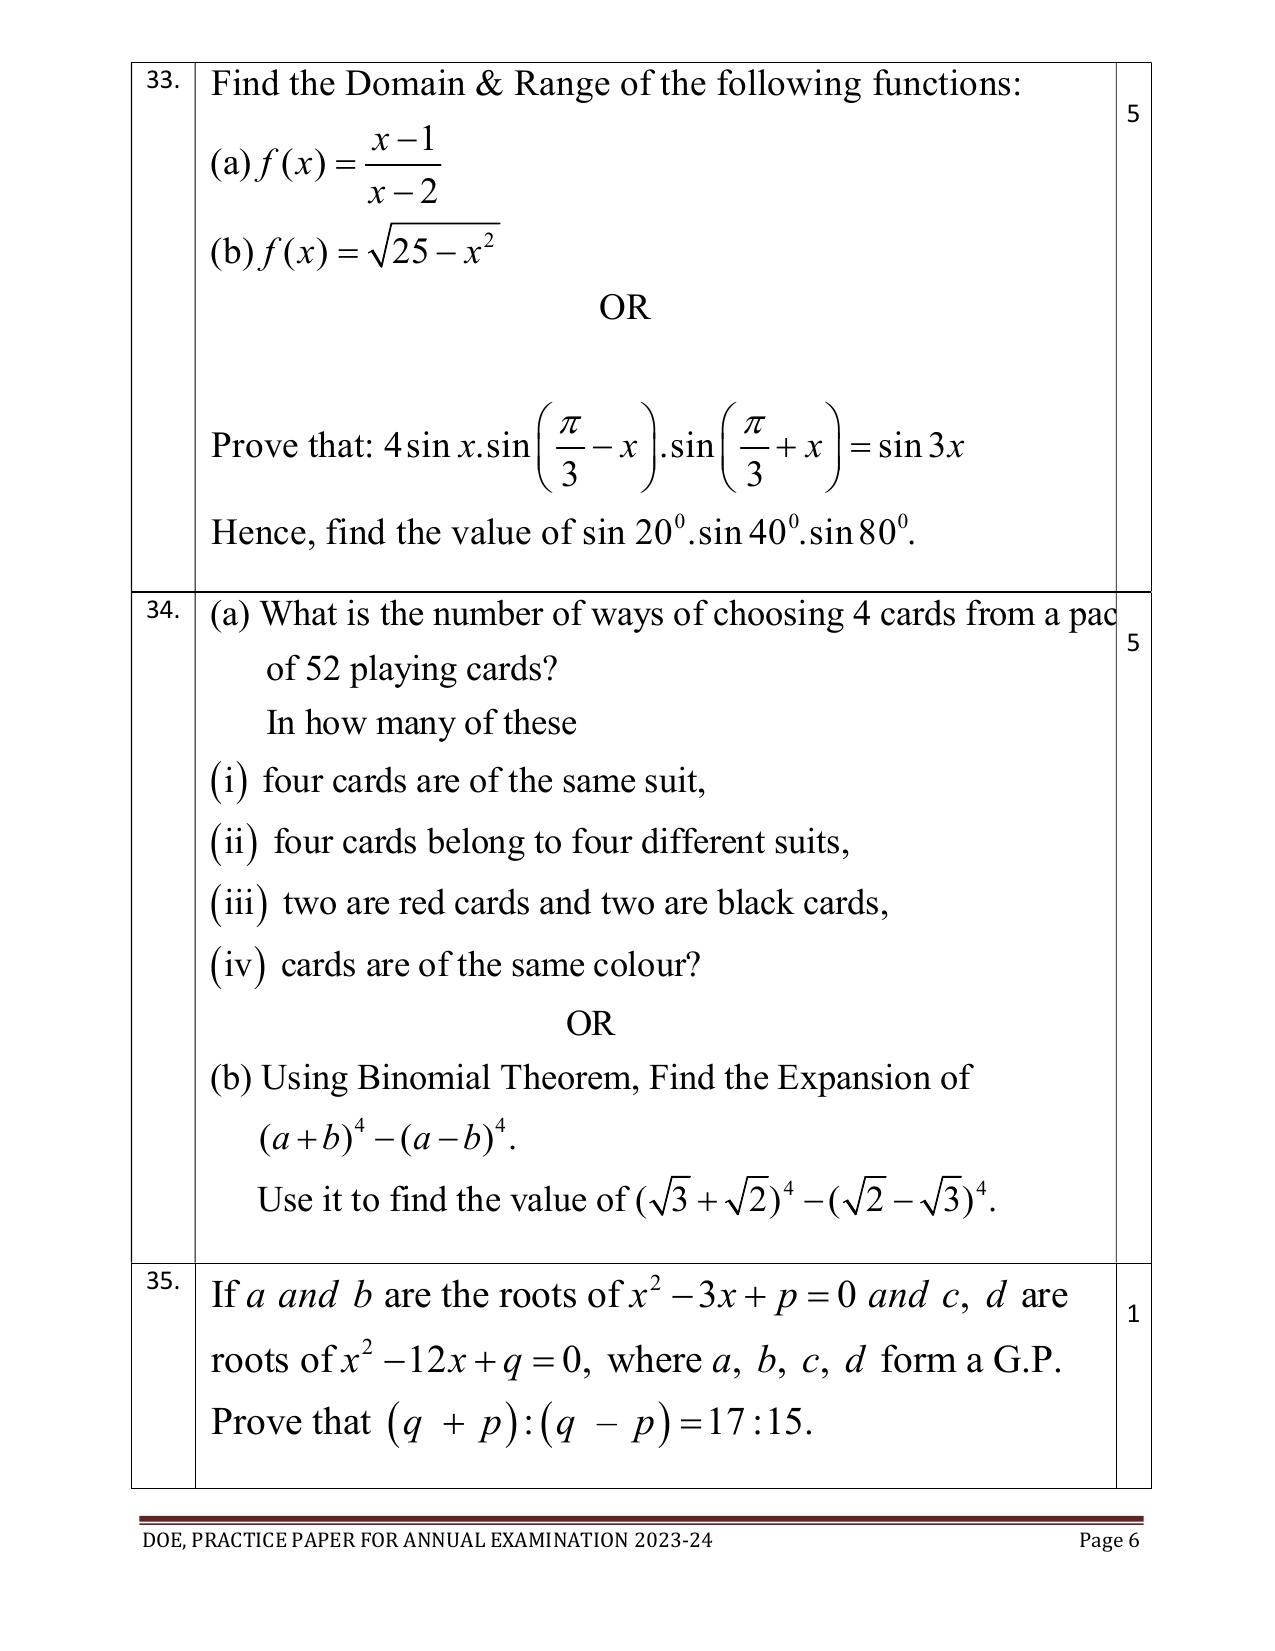 Edudel Class 11 Math (English) Practice Papers-2 (2023-24) - Page 6